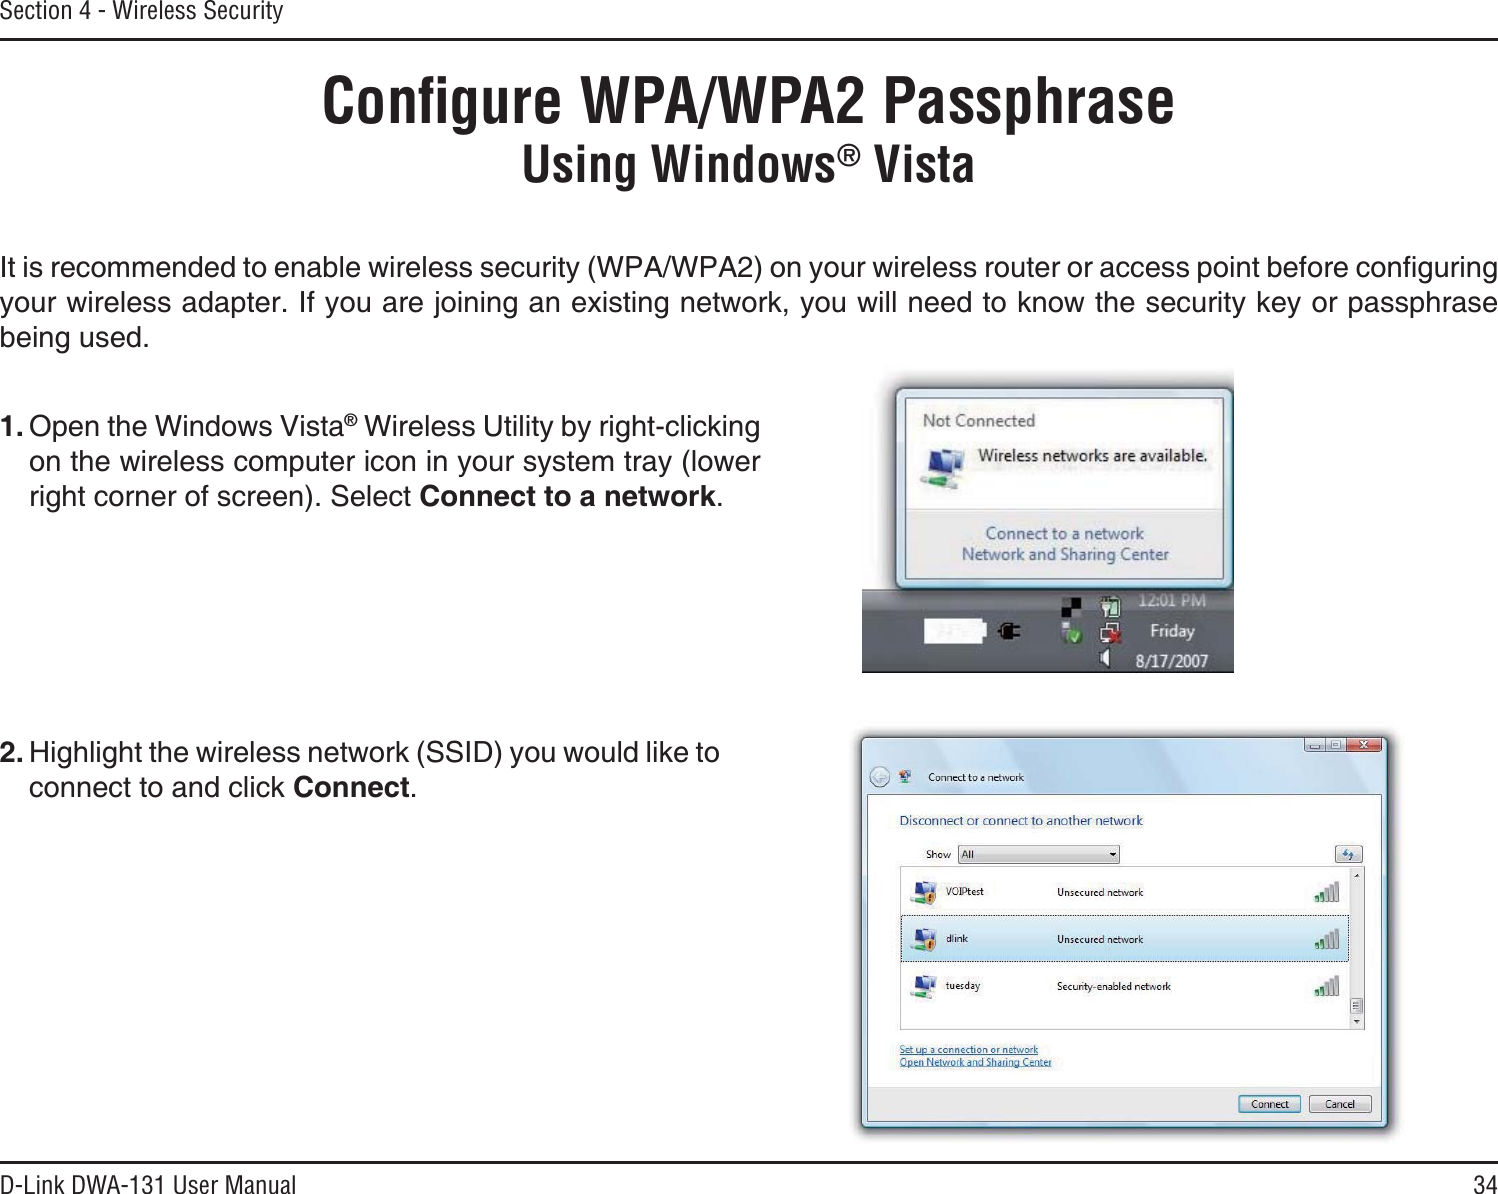 34D-Link DWA-131 User ManualSection 4 - Wireless SecurityConﬁgure WPA/WPA2 PassphraseUsing Windows® Vista+VKUTGEQOOGPFGFVQGPCDNGYKTGNGUUUGEWTKV[92#92#QP[QWTYKTGNGUUTQWVGTQTCEEGUURQKPVDGHQTGEQPſIWTKPIyour wireless adapter. If you are joining an existing network, you will need to know the security key or passphrase being used.2. Highlight the wireless network (SSID) you would like to connect to and click Connect.1. Open the Windows Vista® Wireless Utility by right-clicking on the wireless computer icon in your system tray (lower right corner of screen). Select Connect to a network.